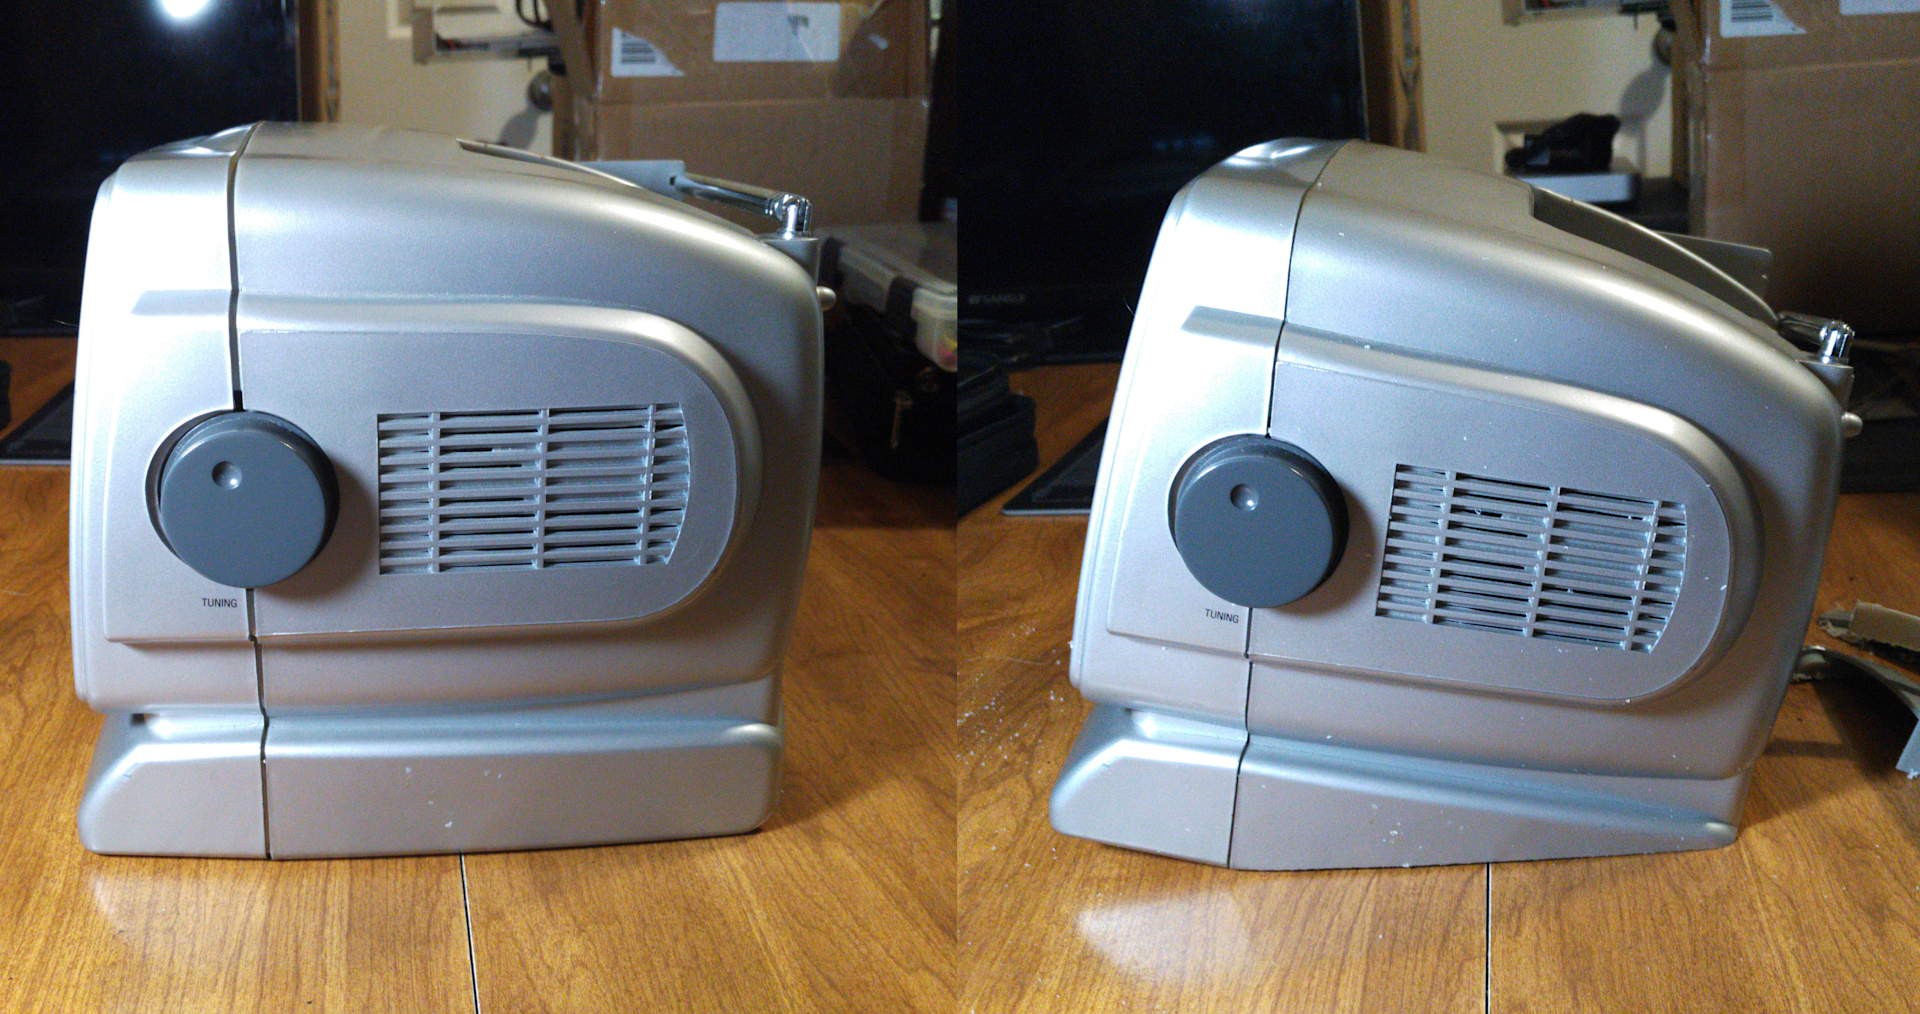 Coby TV before and after modification